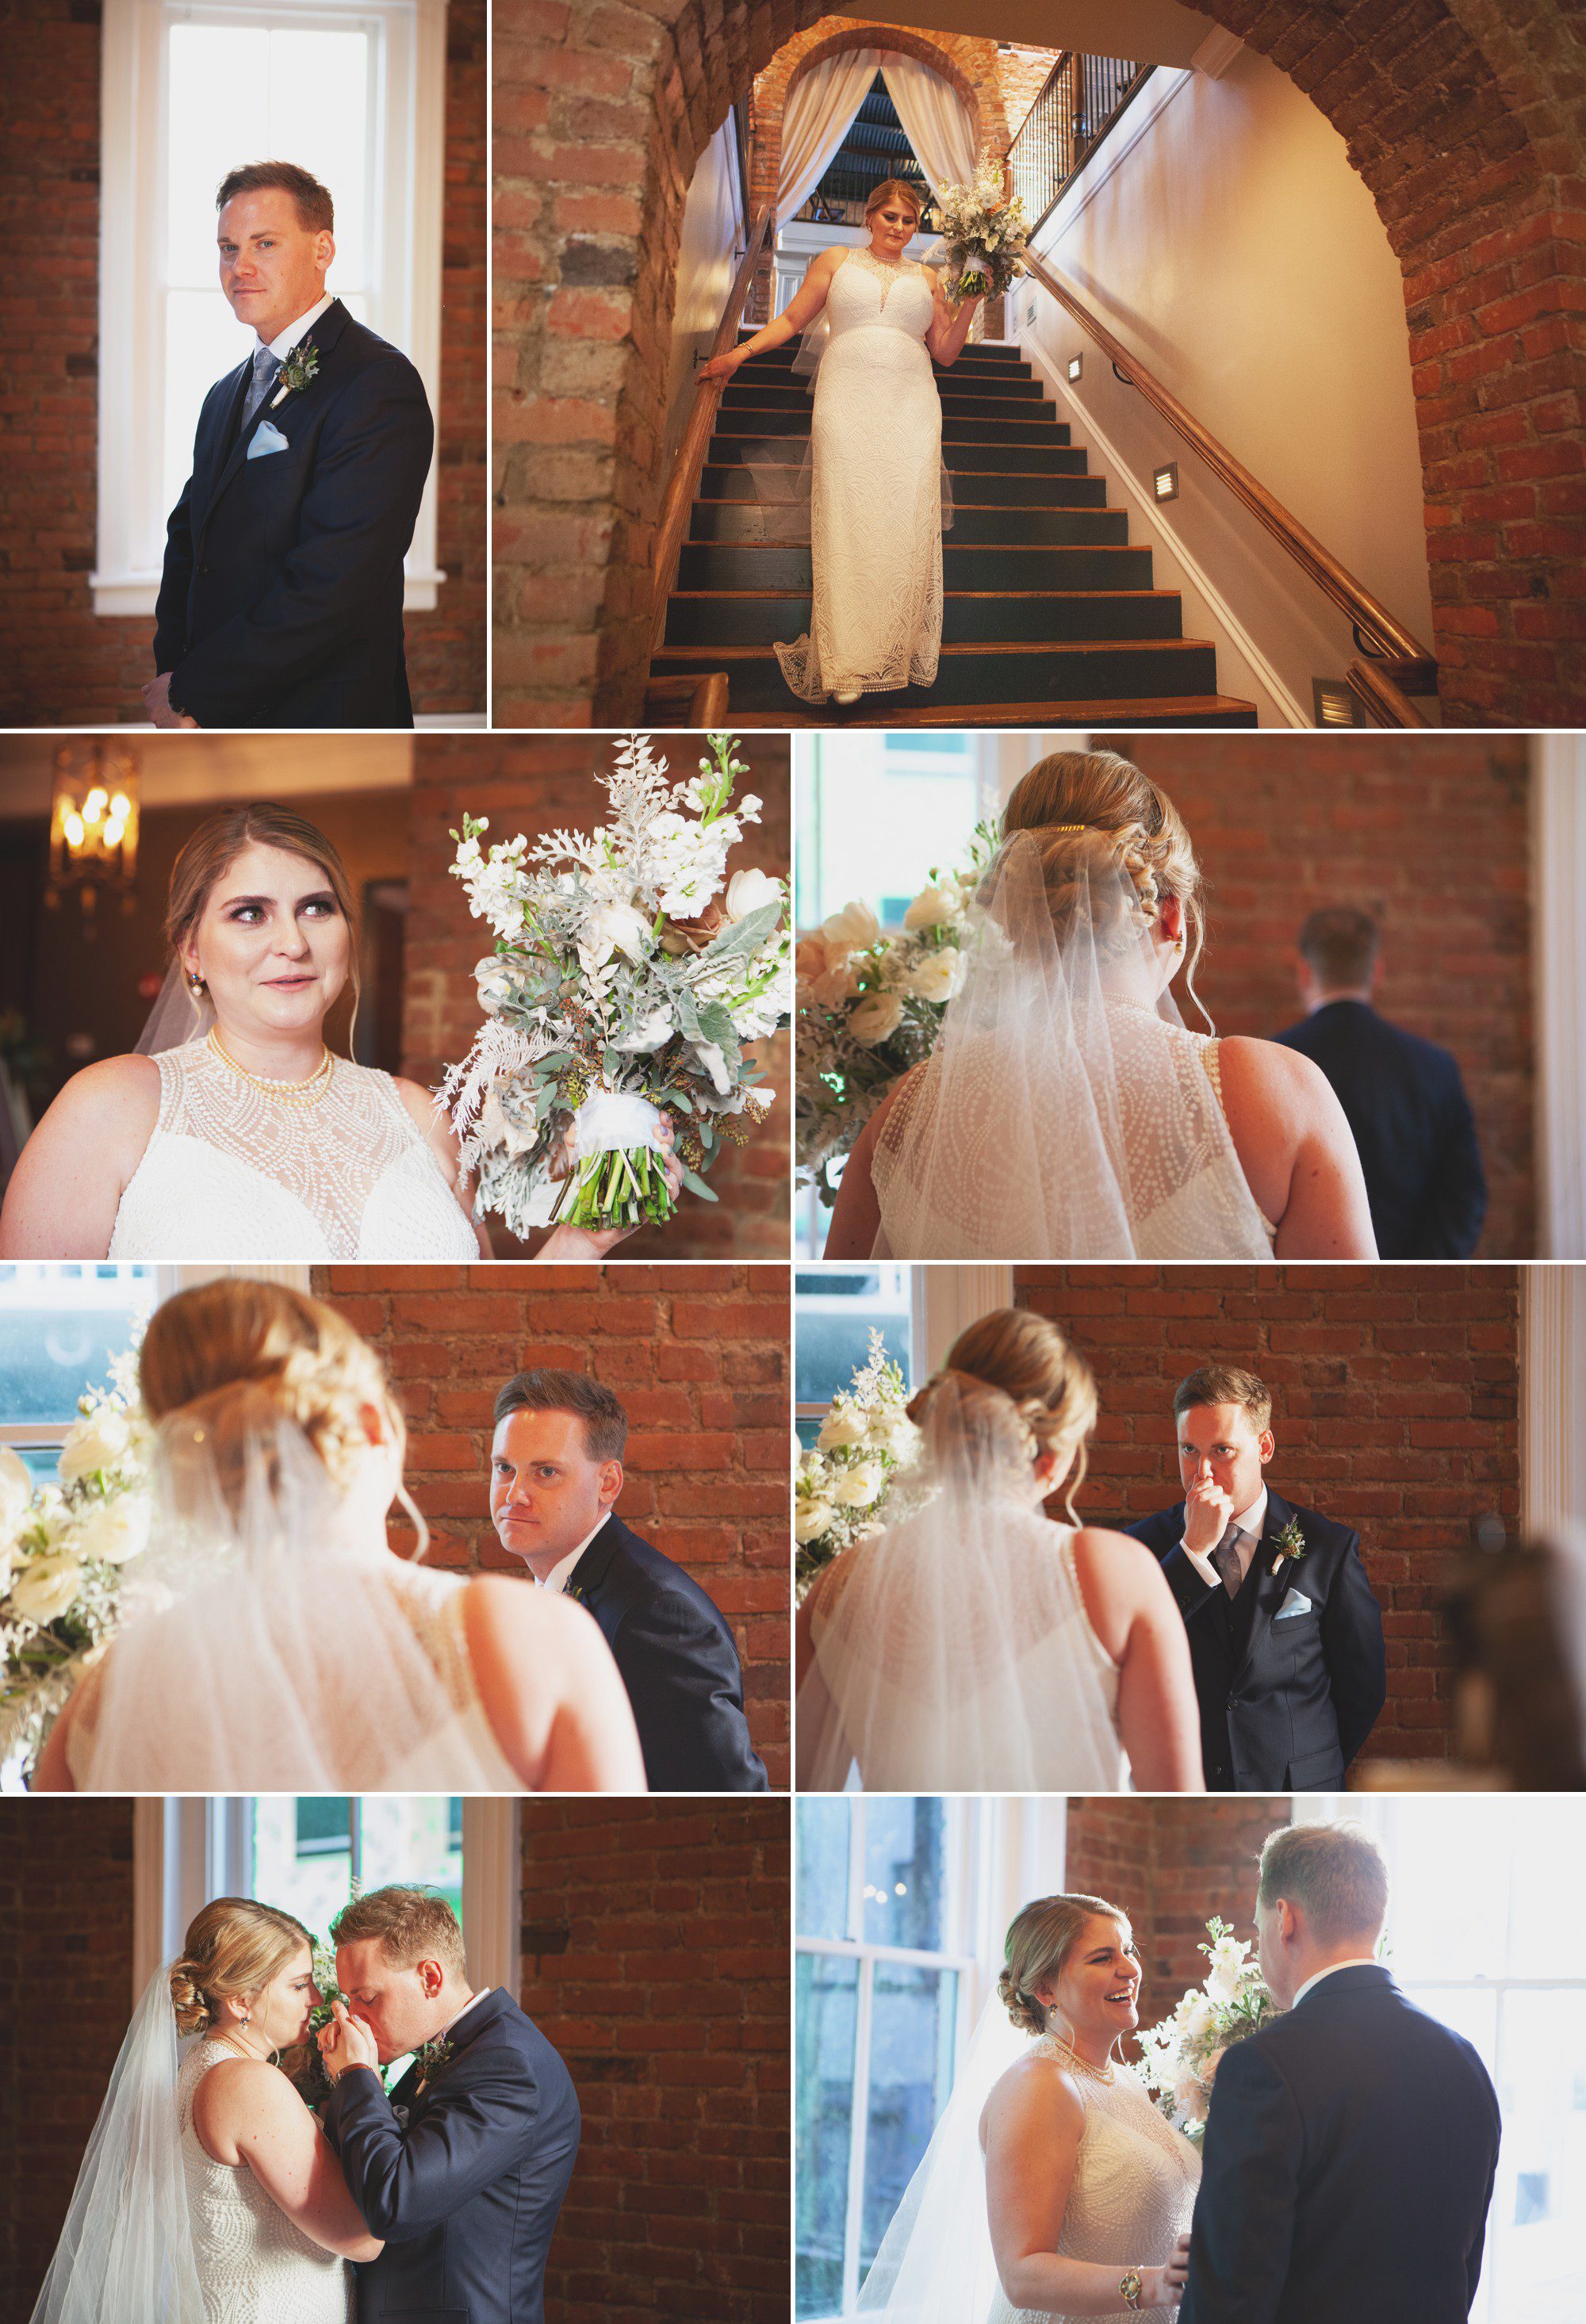 First look between bride and groom at McConnell House in Franklin, TN before wedding ceremony. Photos by Krista Lee Photography Nashville, TN